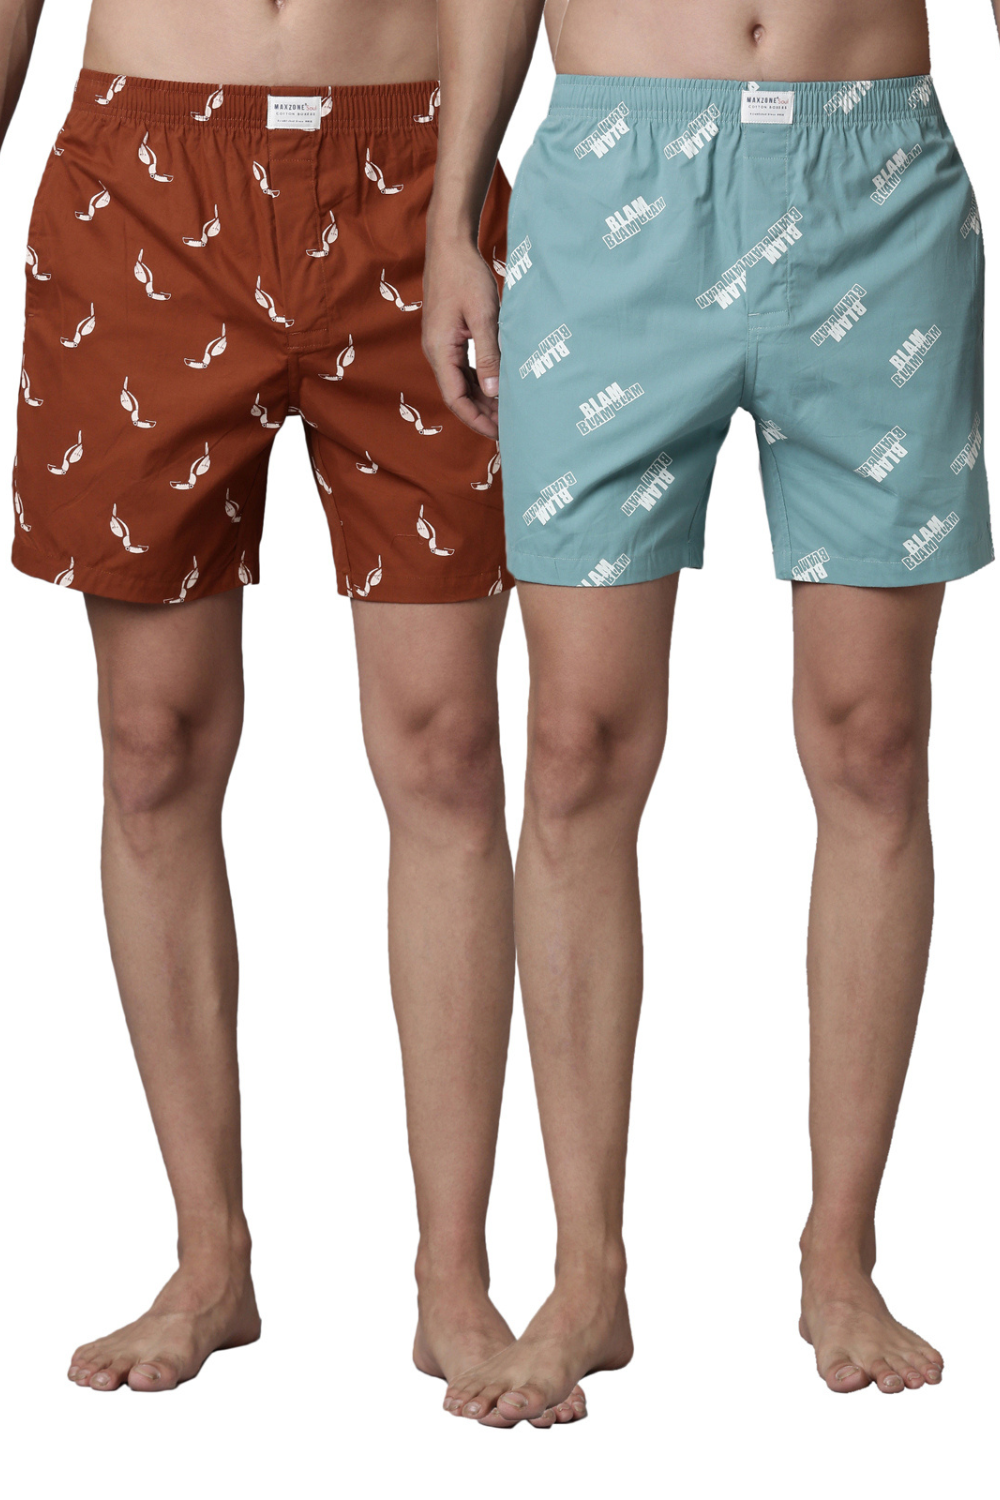 Sea-Foam Printed &  Russet Printed 365 Boxers Combo  Maxzone Clothing   